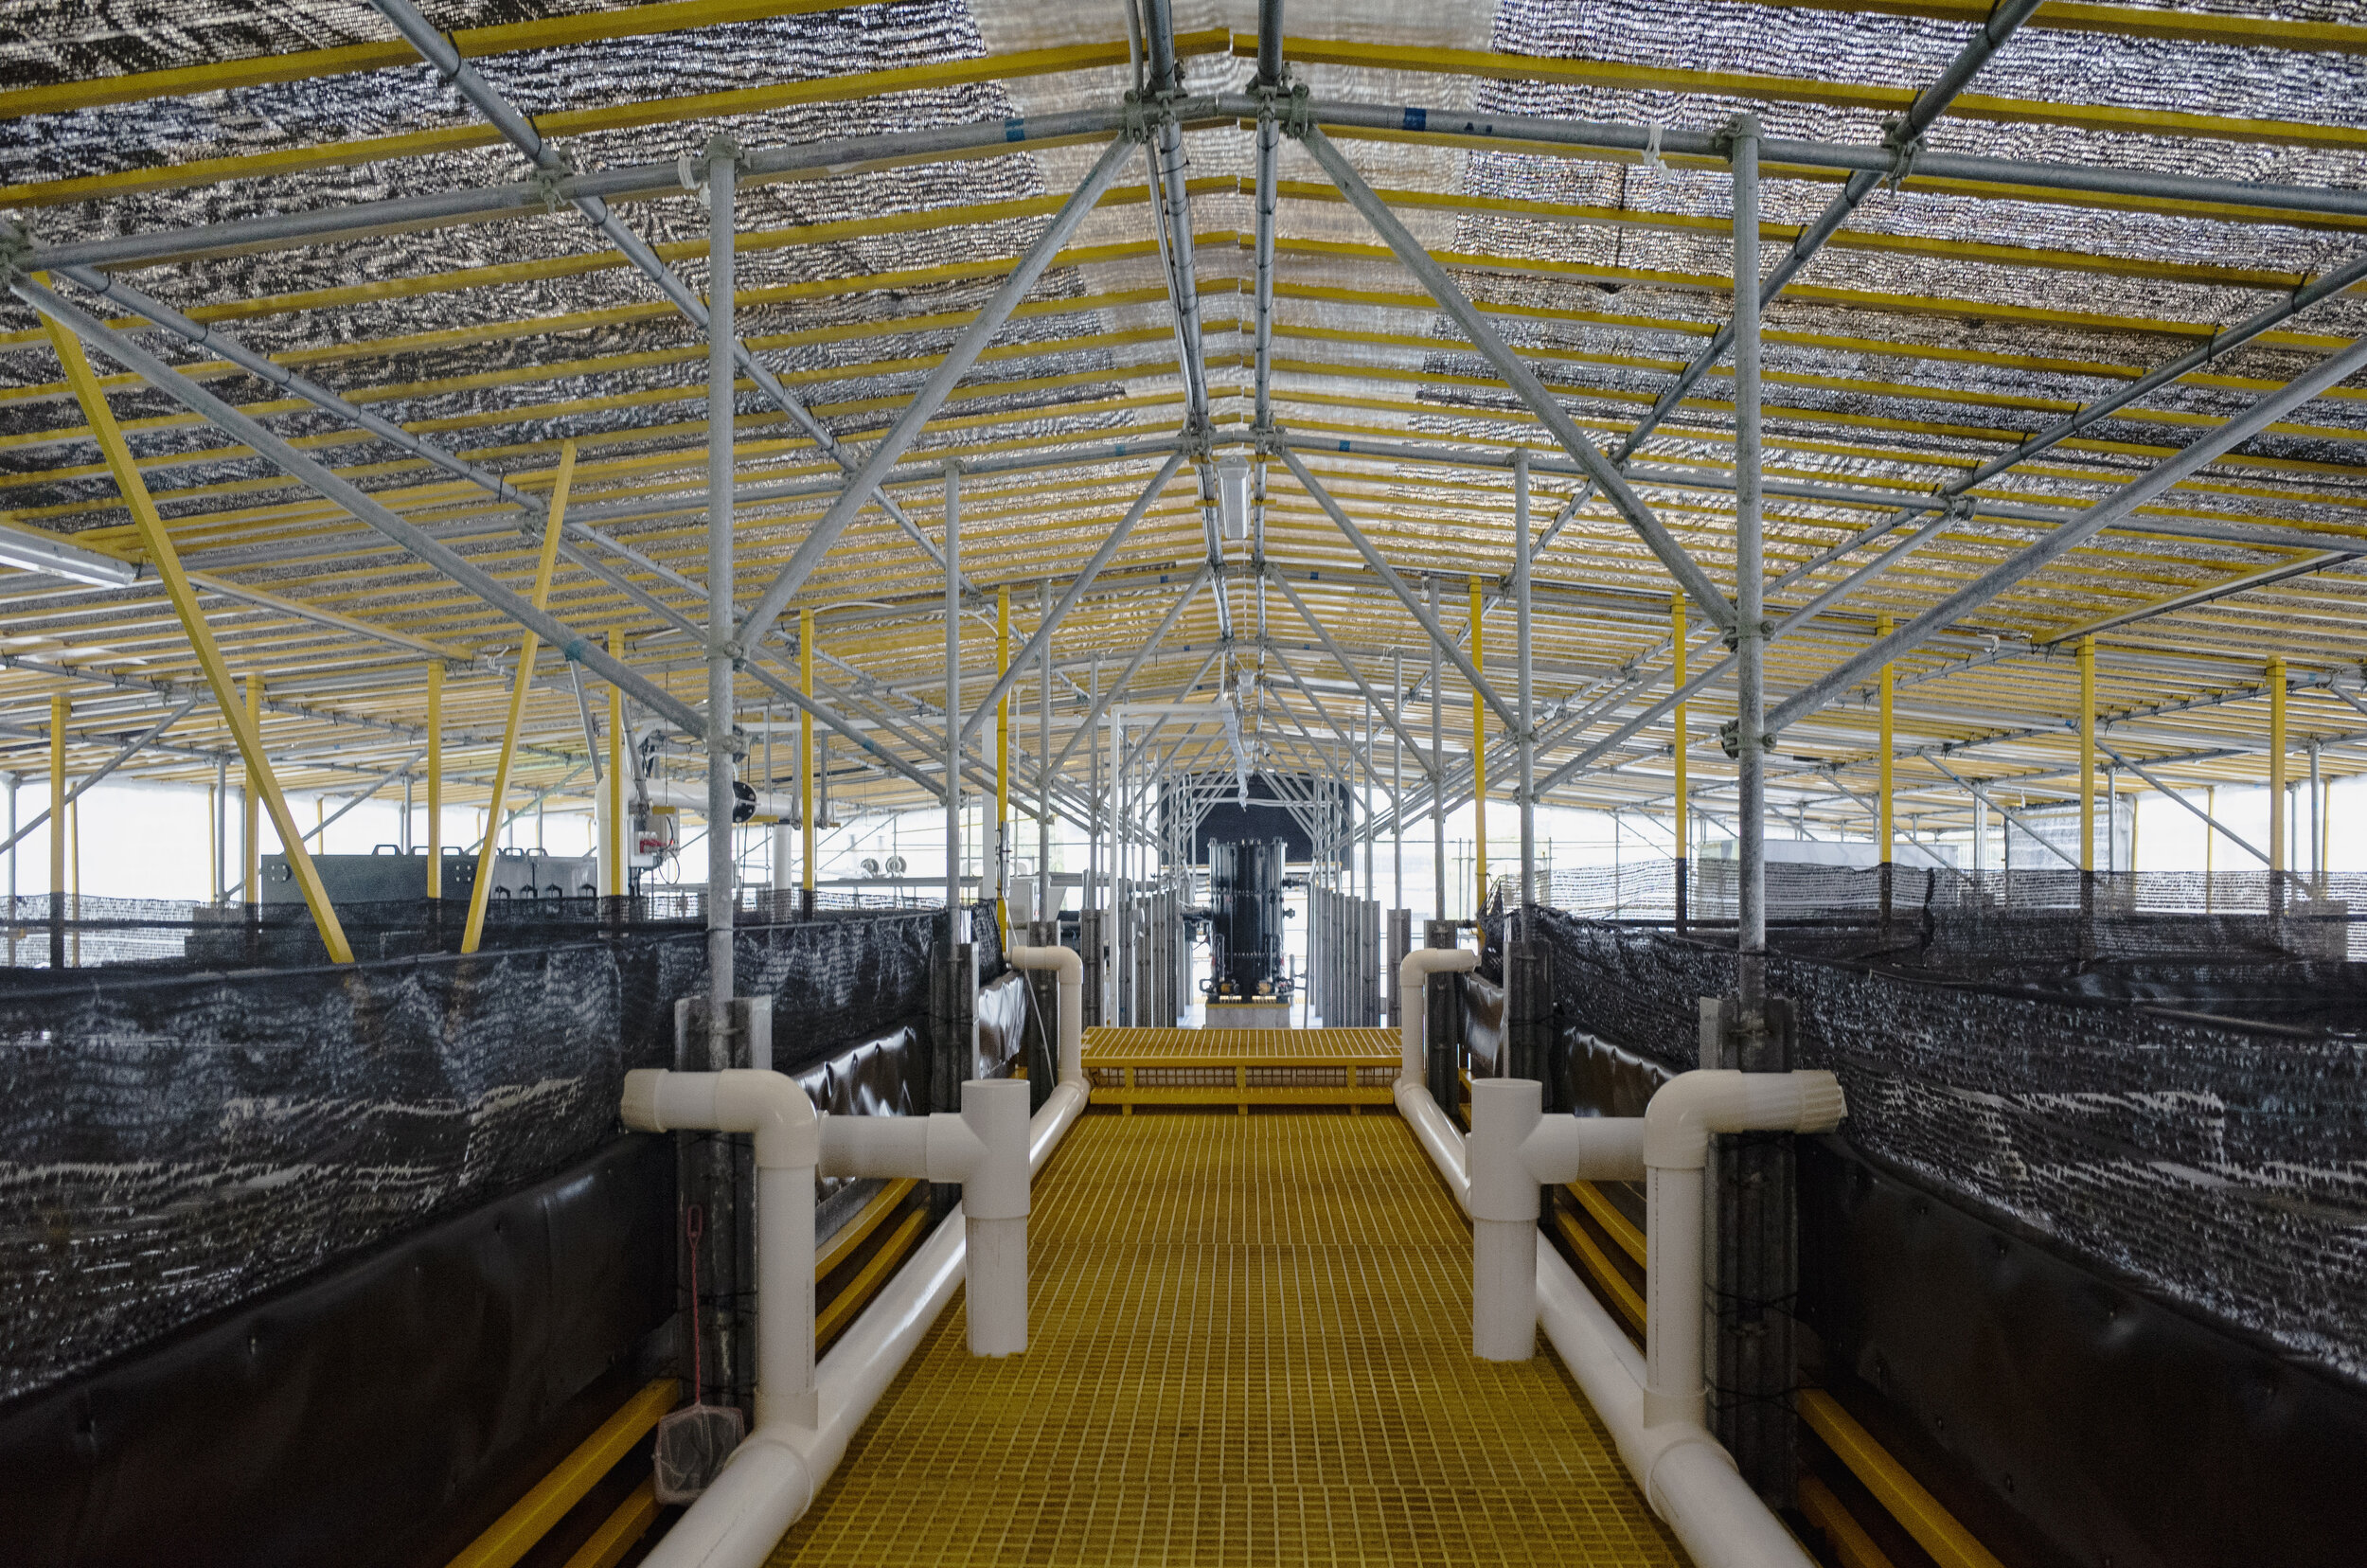  An interior view of the top level of Apollo Aquaculture Group’s two-tiered vertical fish farm in northern Singapore 